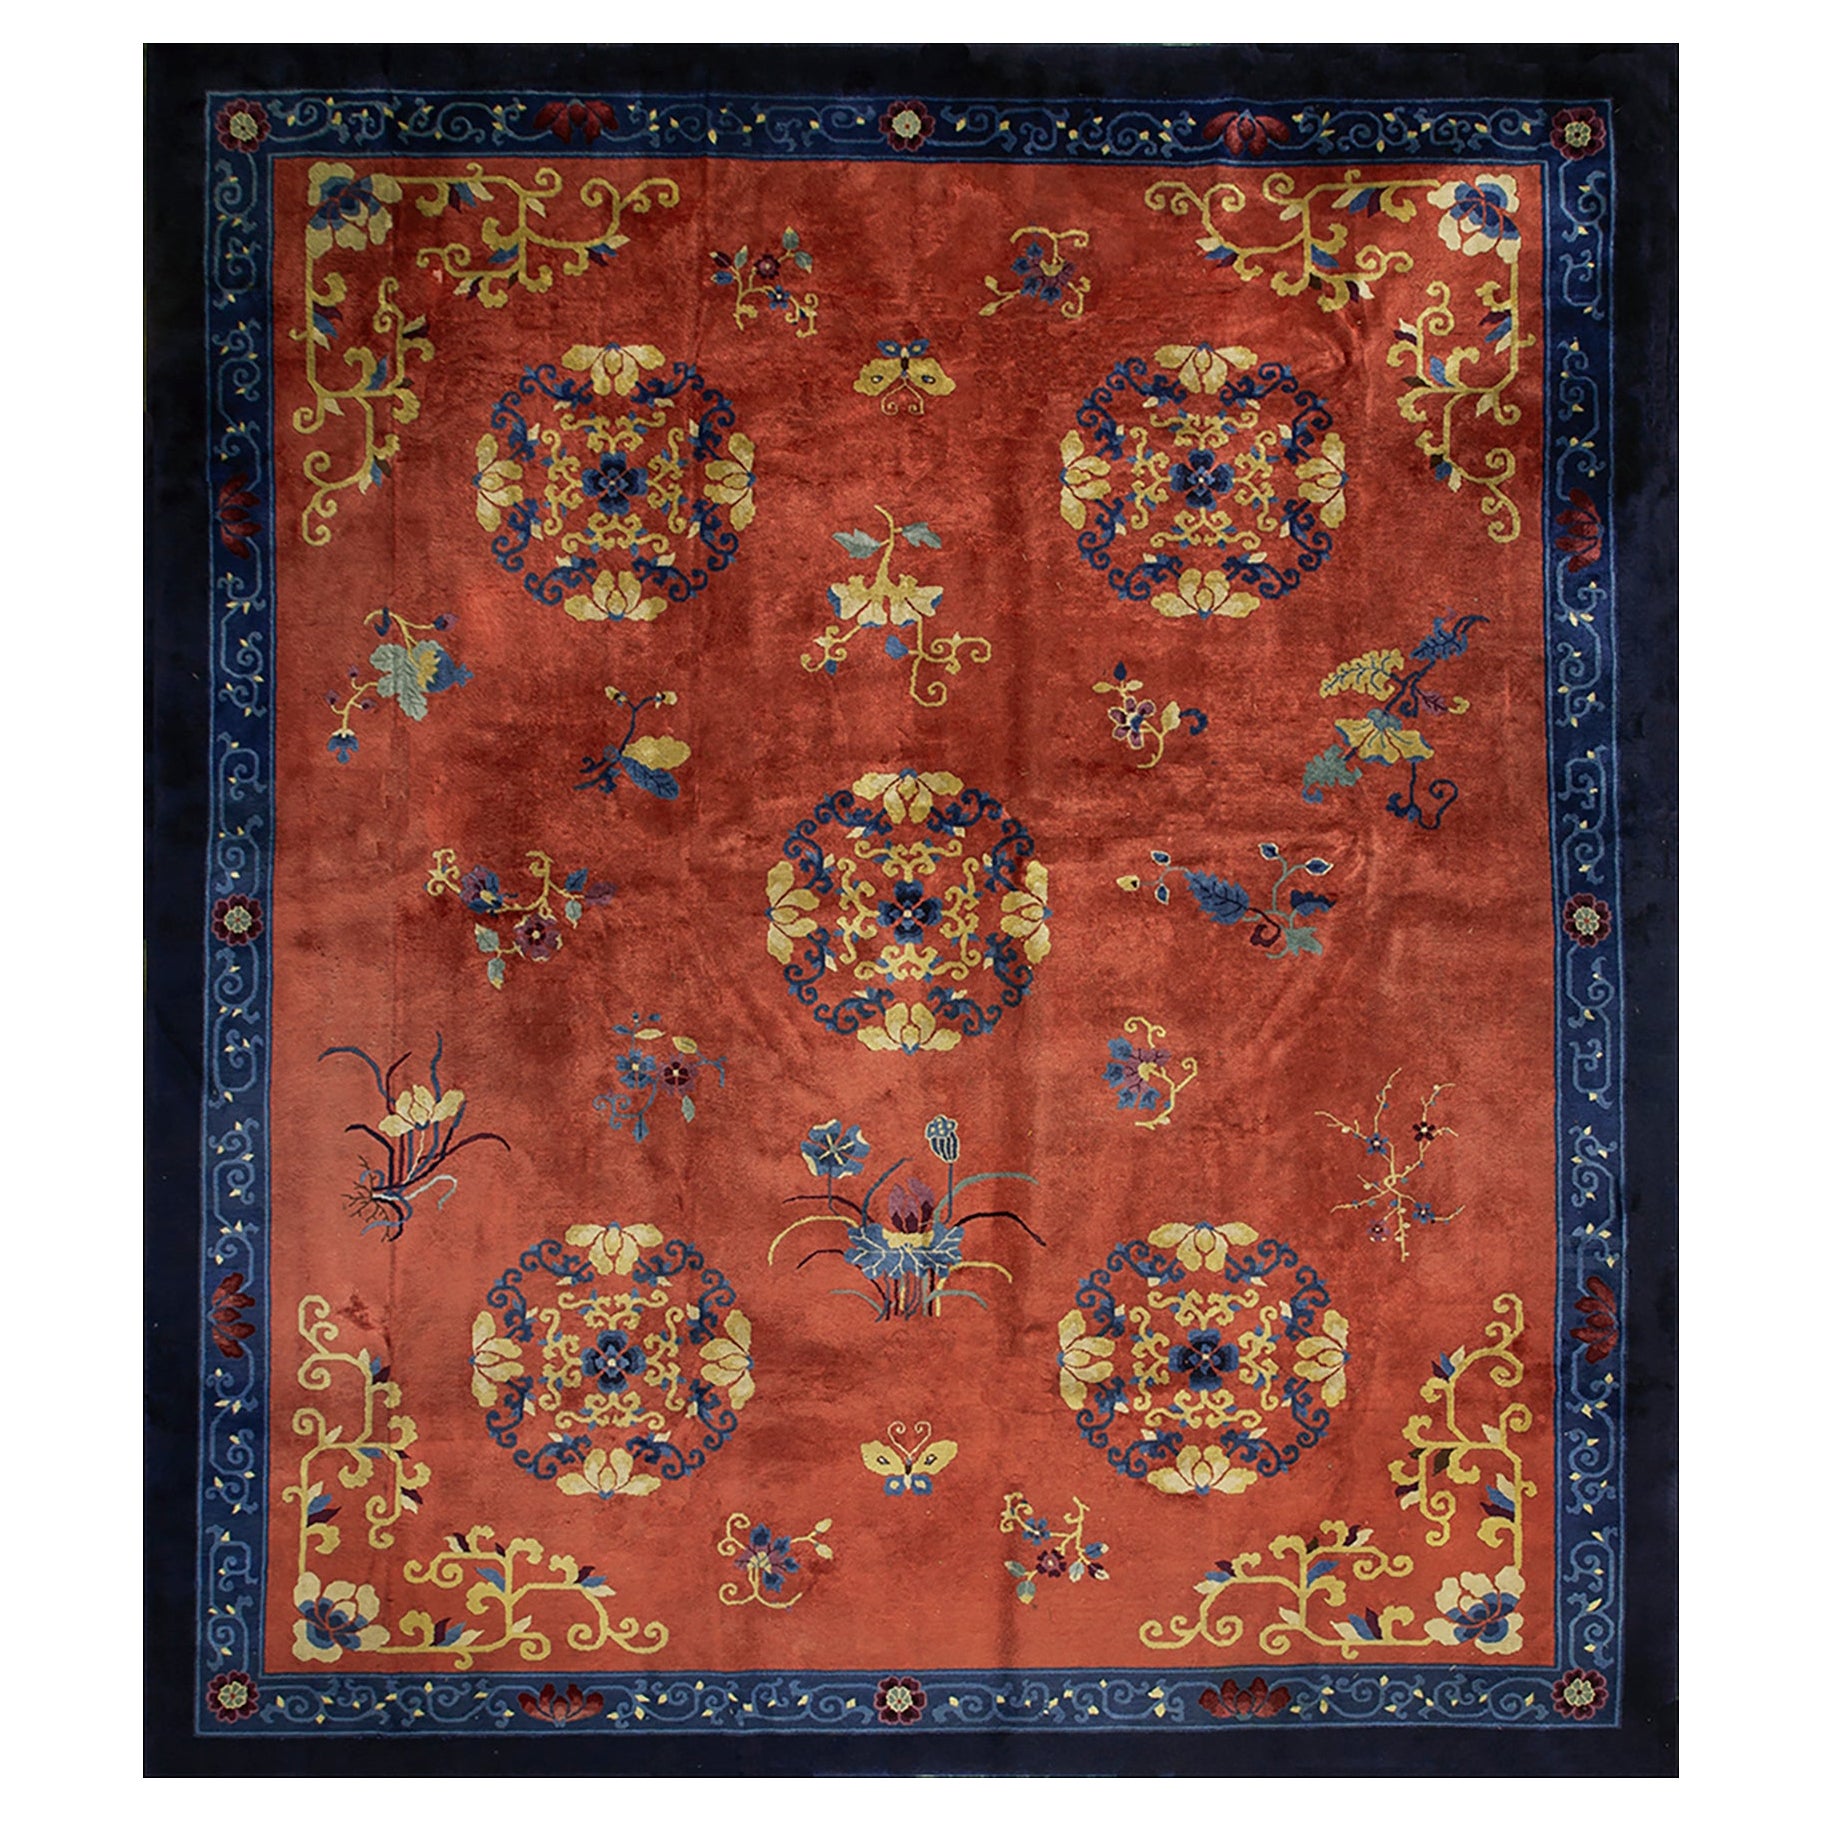 Early 20th Century Chinese Peking Carpet ( 11'9" x 13'3" - 358 x 404 ) For Sale